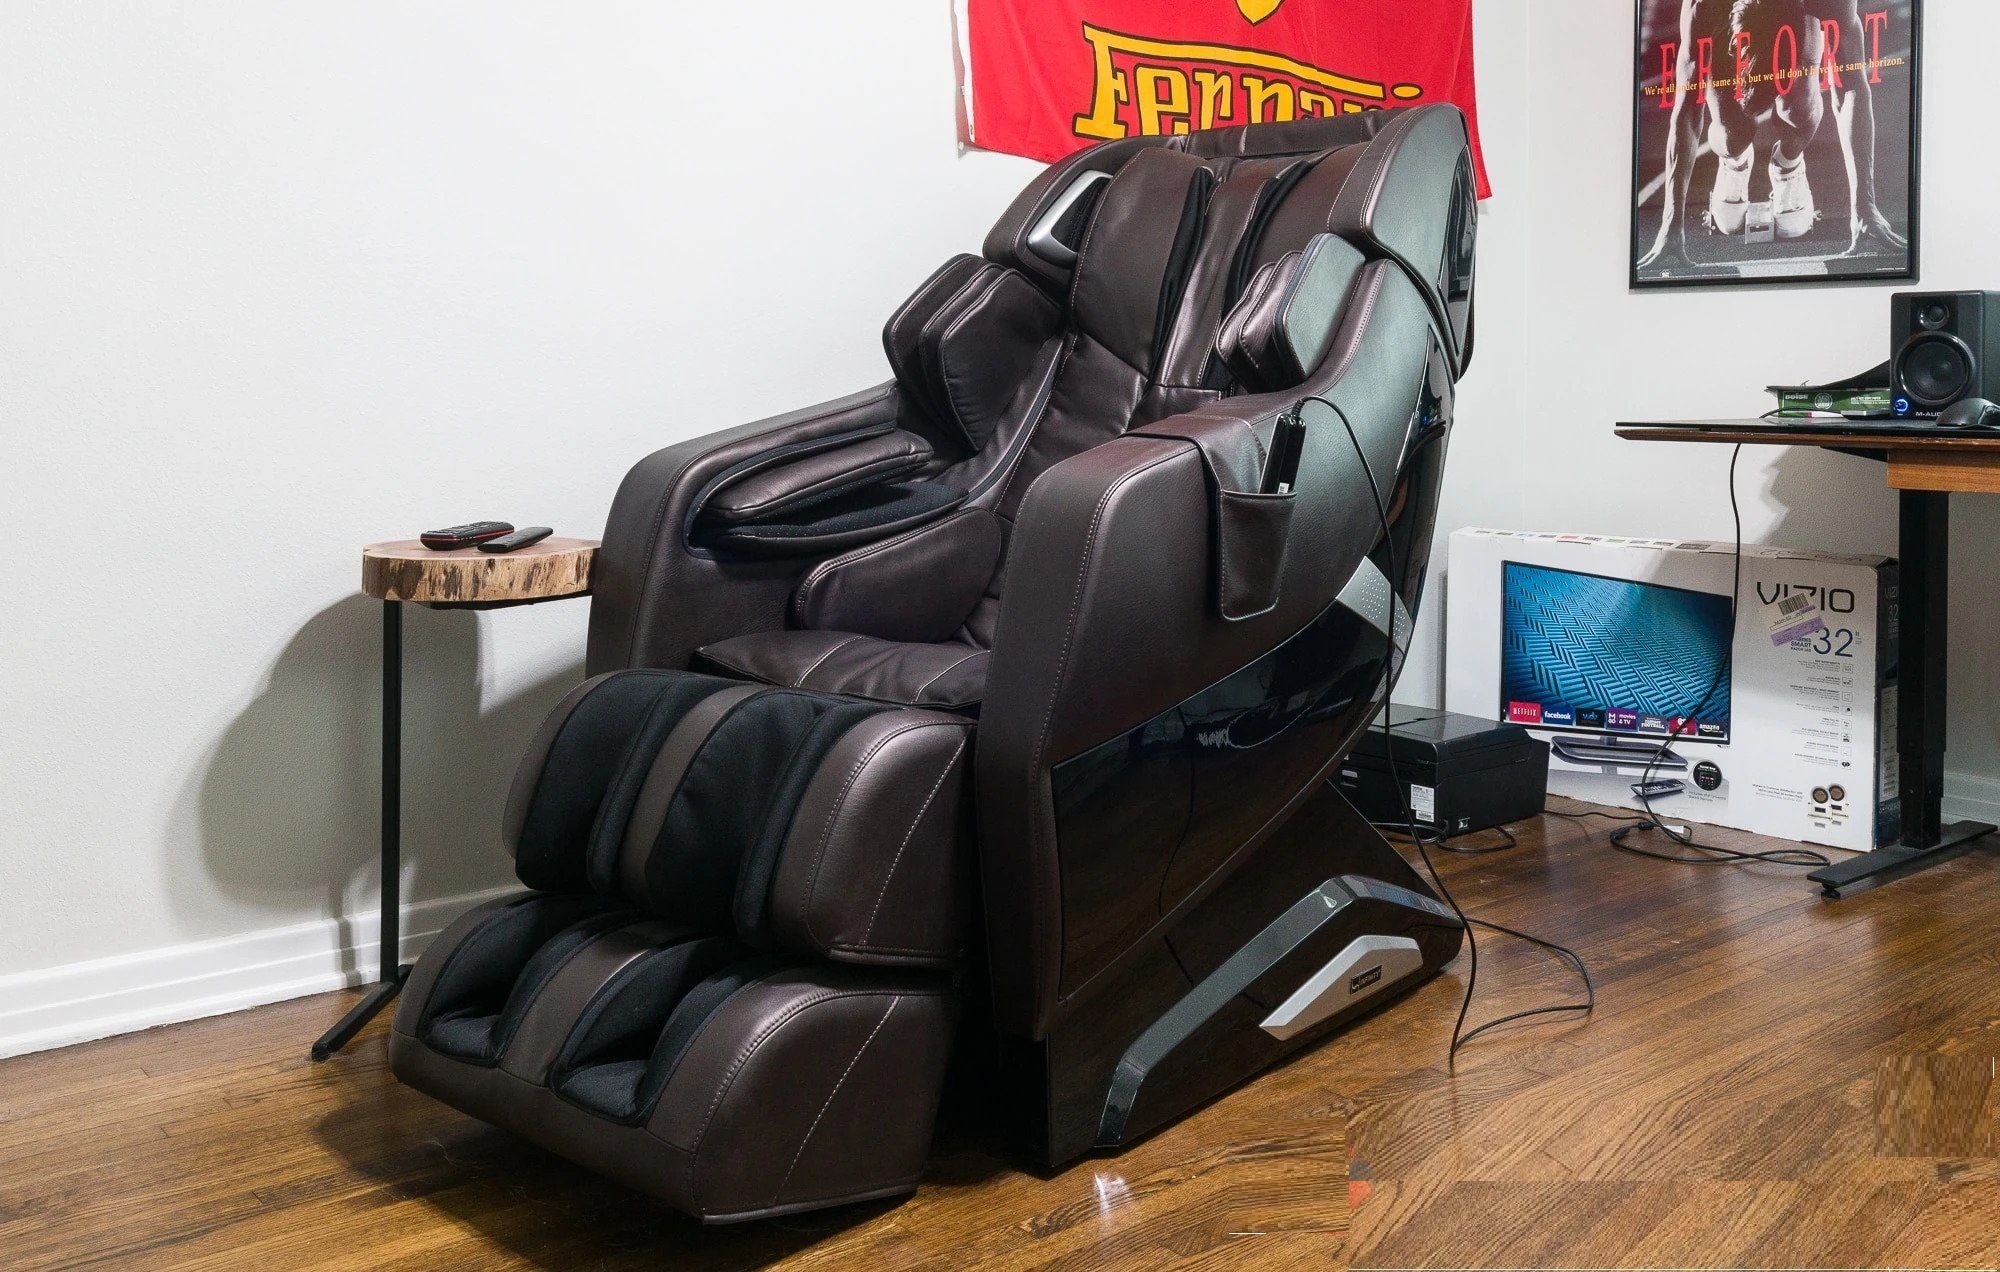 How Much Electricity Does a Massage Chair Use